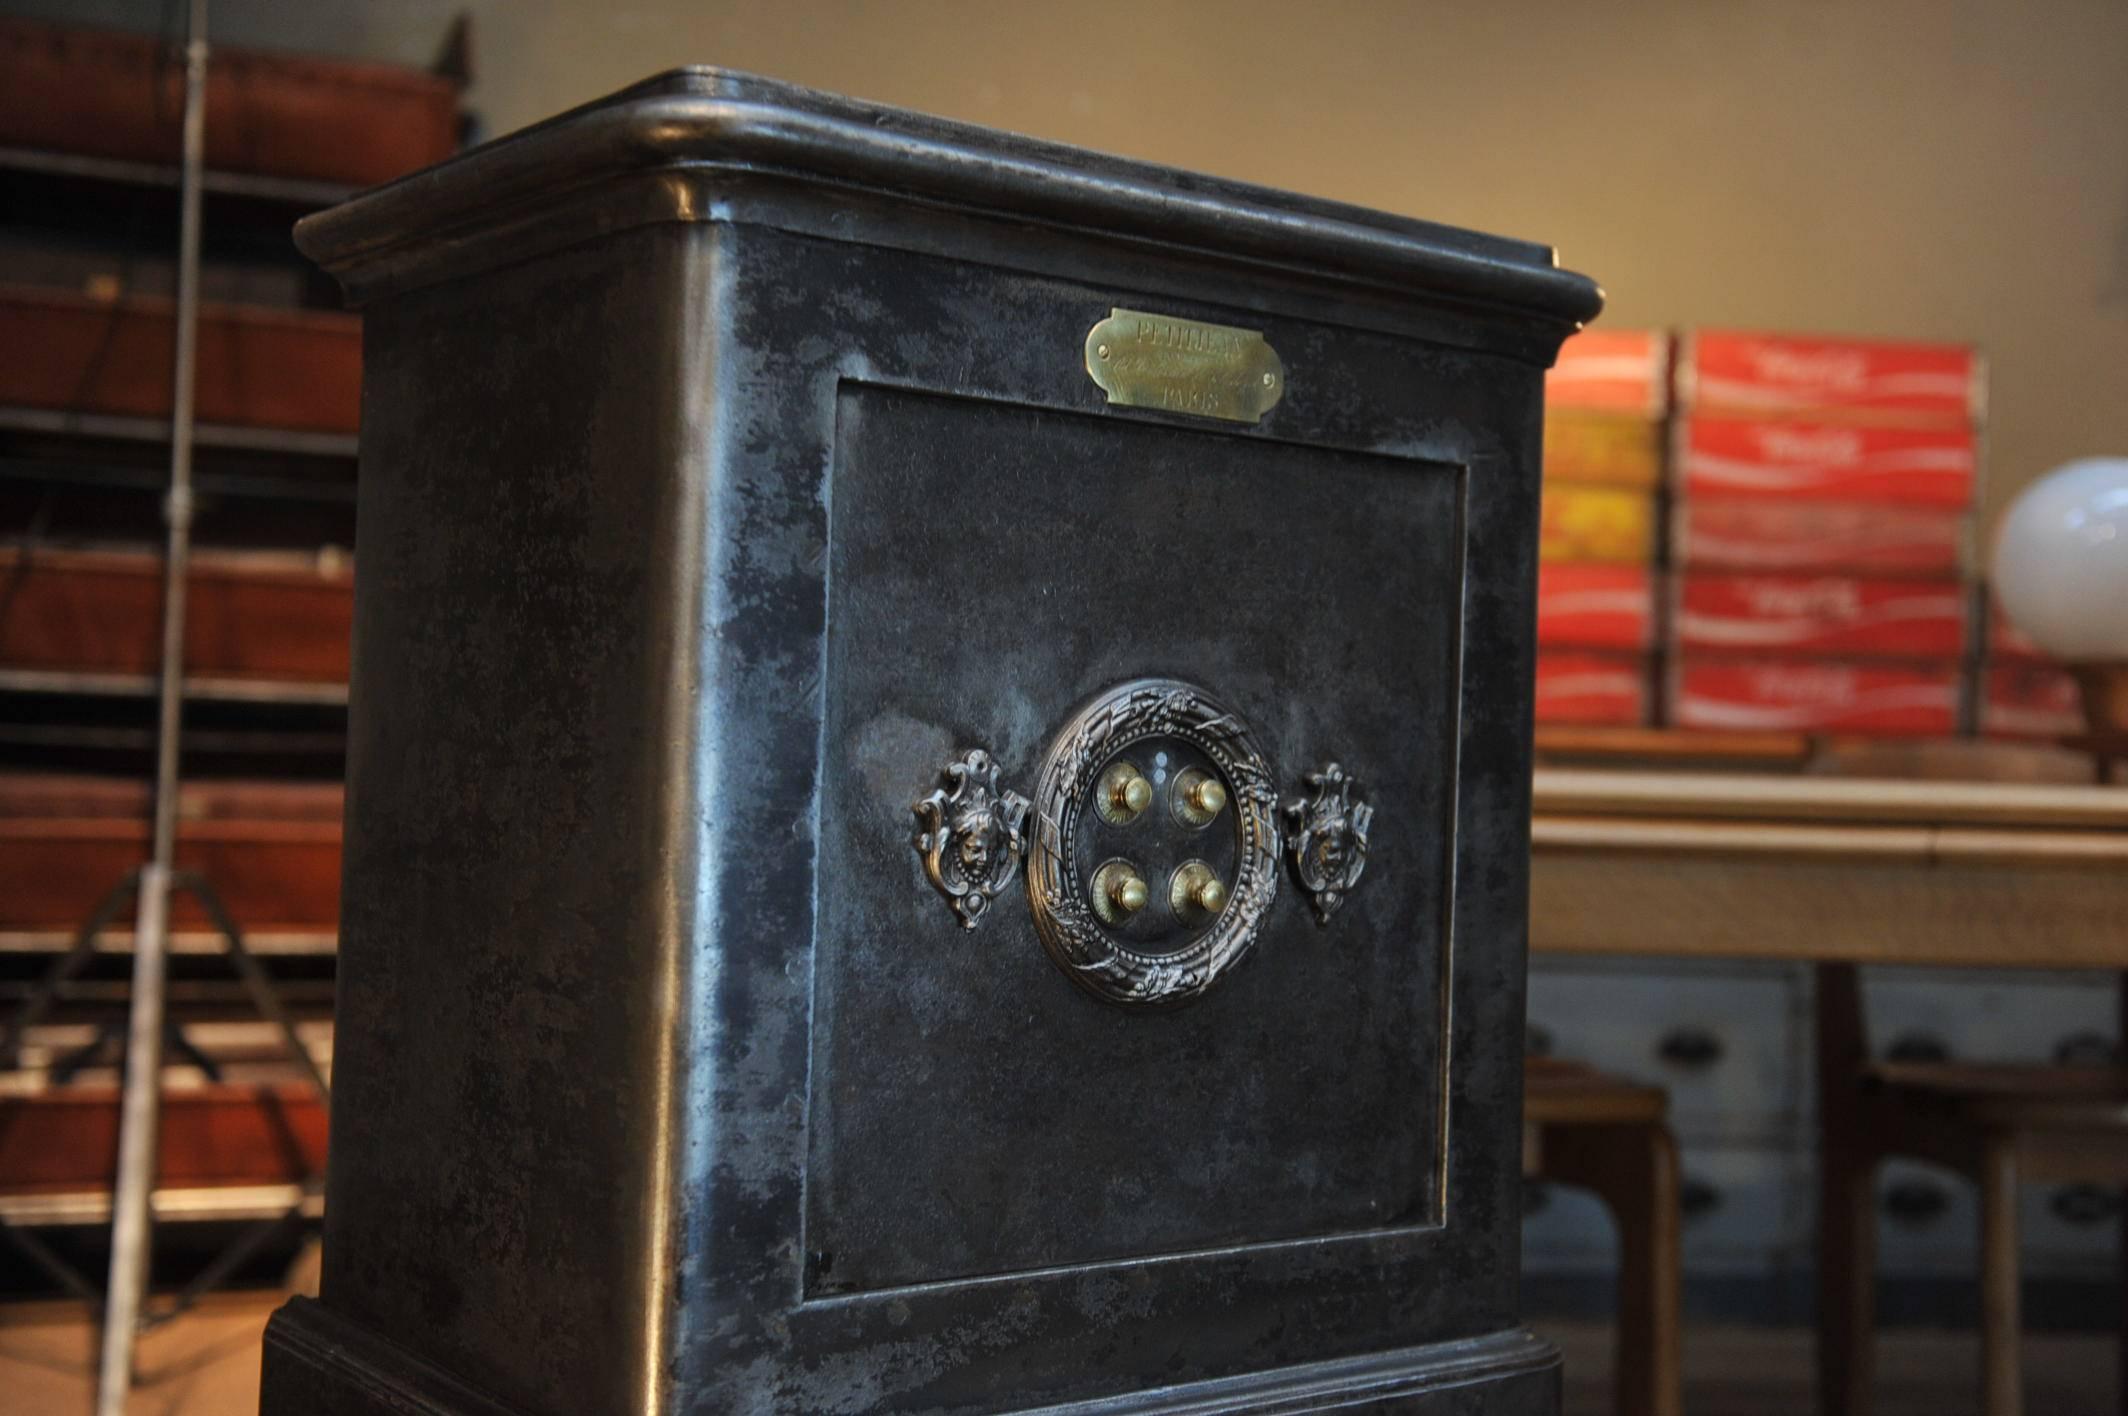 Antique iron Parisian safe box, circa 1880 with its original keys.
Beautiful front door with cherubs ornaments
Signed :PETITJEAN PARIS SGDG Paris , on bronze.
Two removable shelves inside top compartment.
Striped polished and varnished very fine